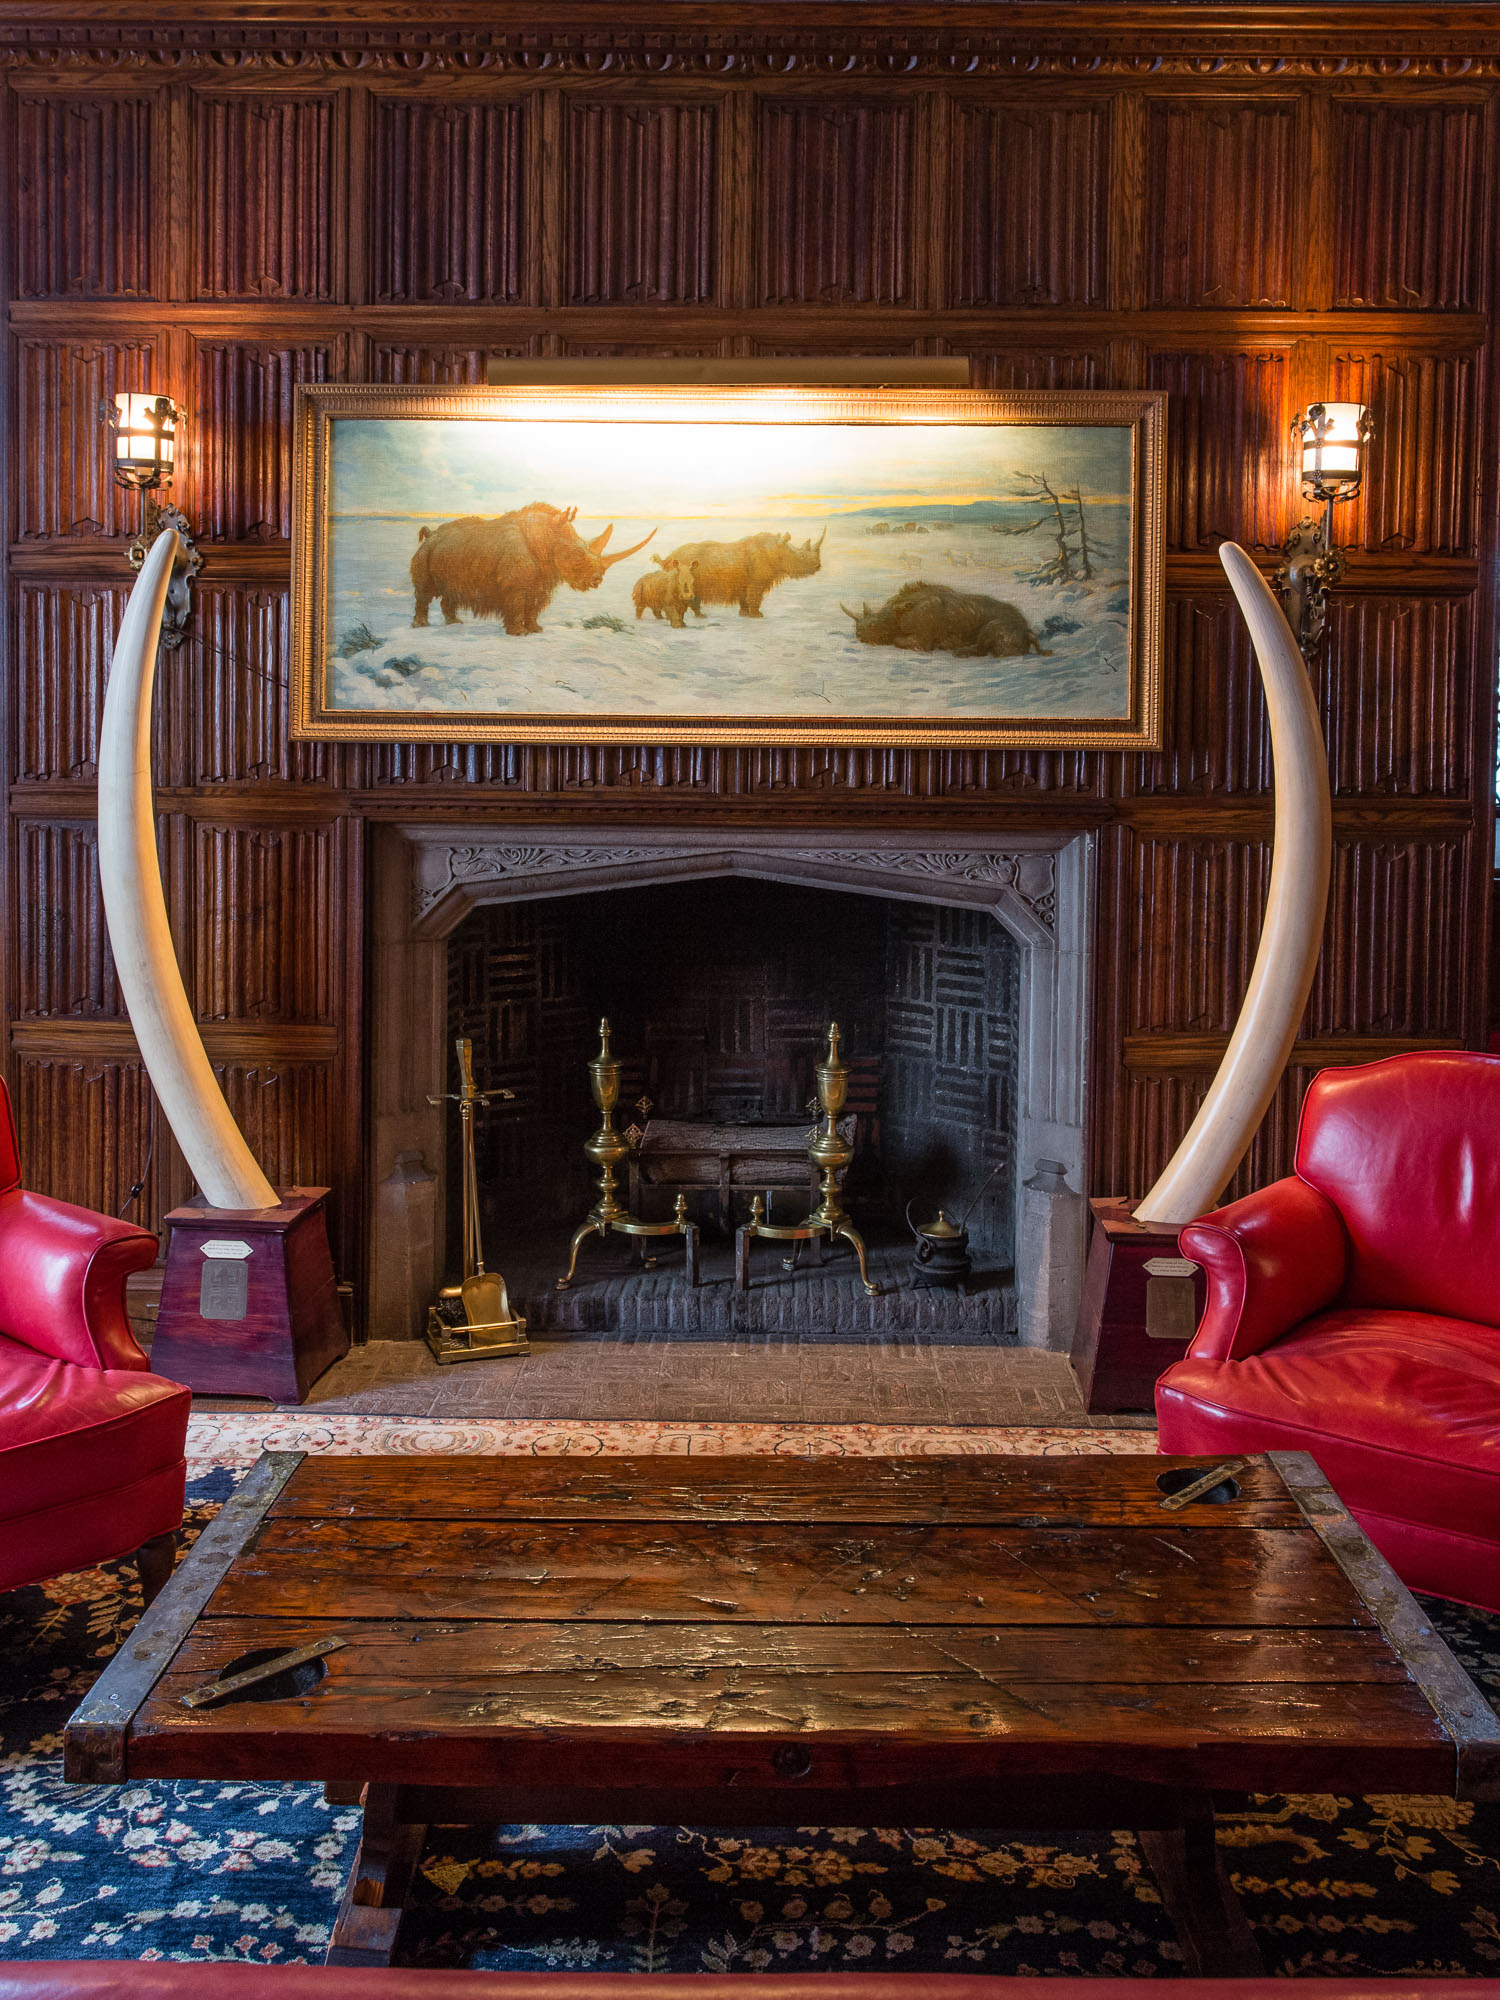 The fireplace in the members' lounge of The Explorers Club is flanked by two elephant tusks.